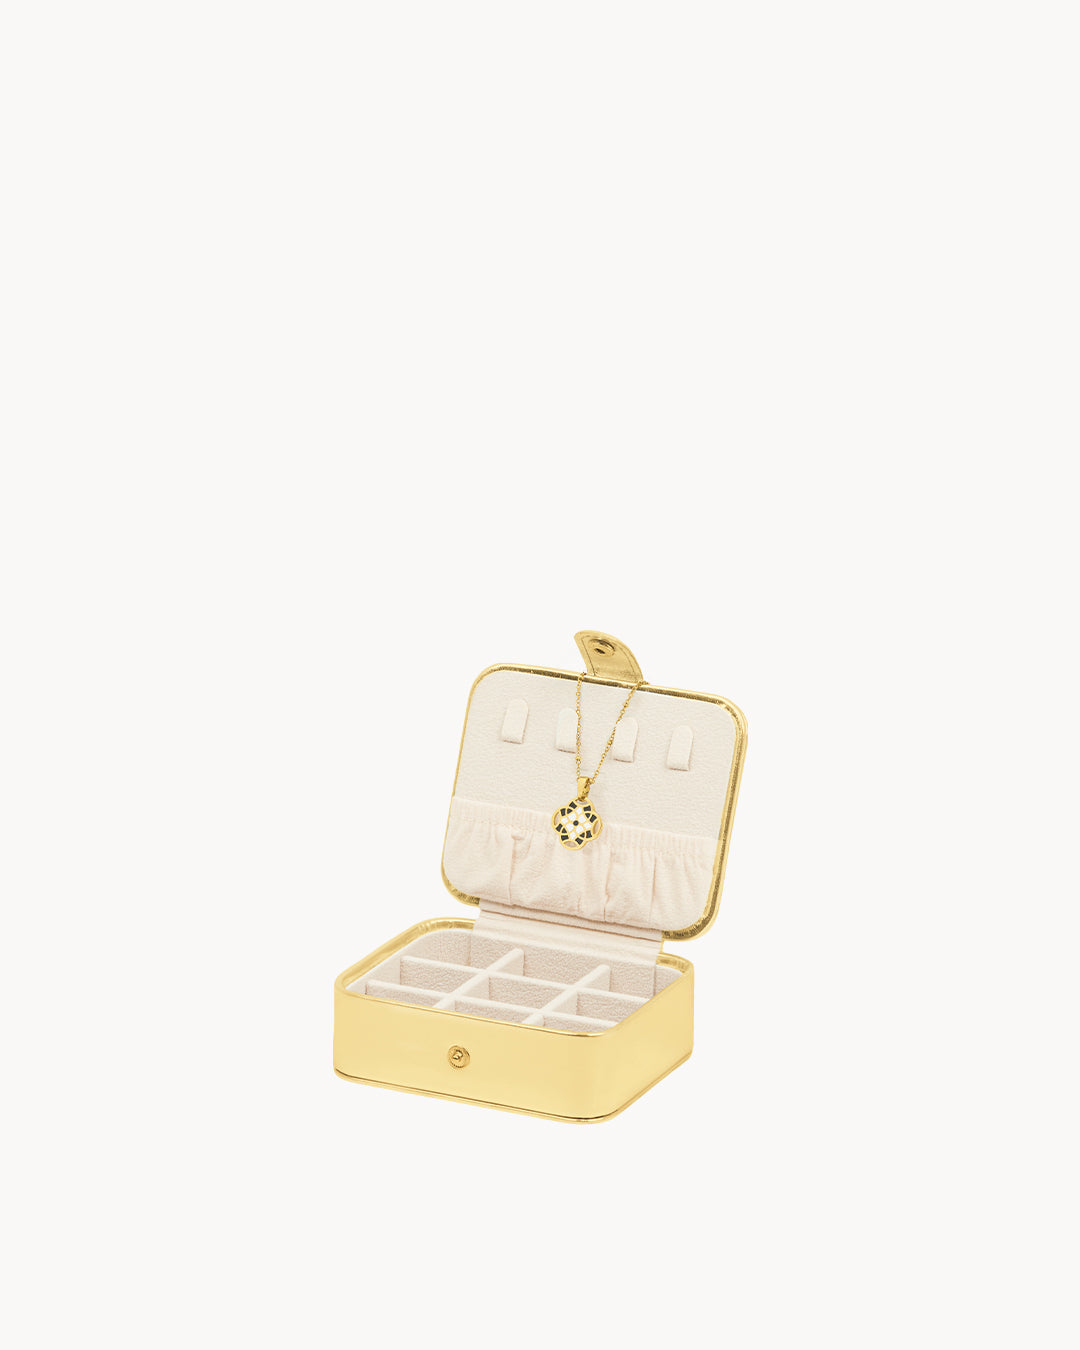 Teacher Gold Box with Necklace Set